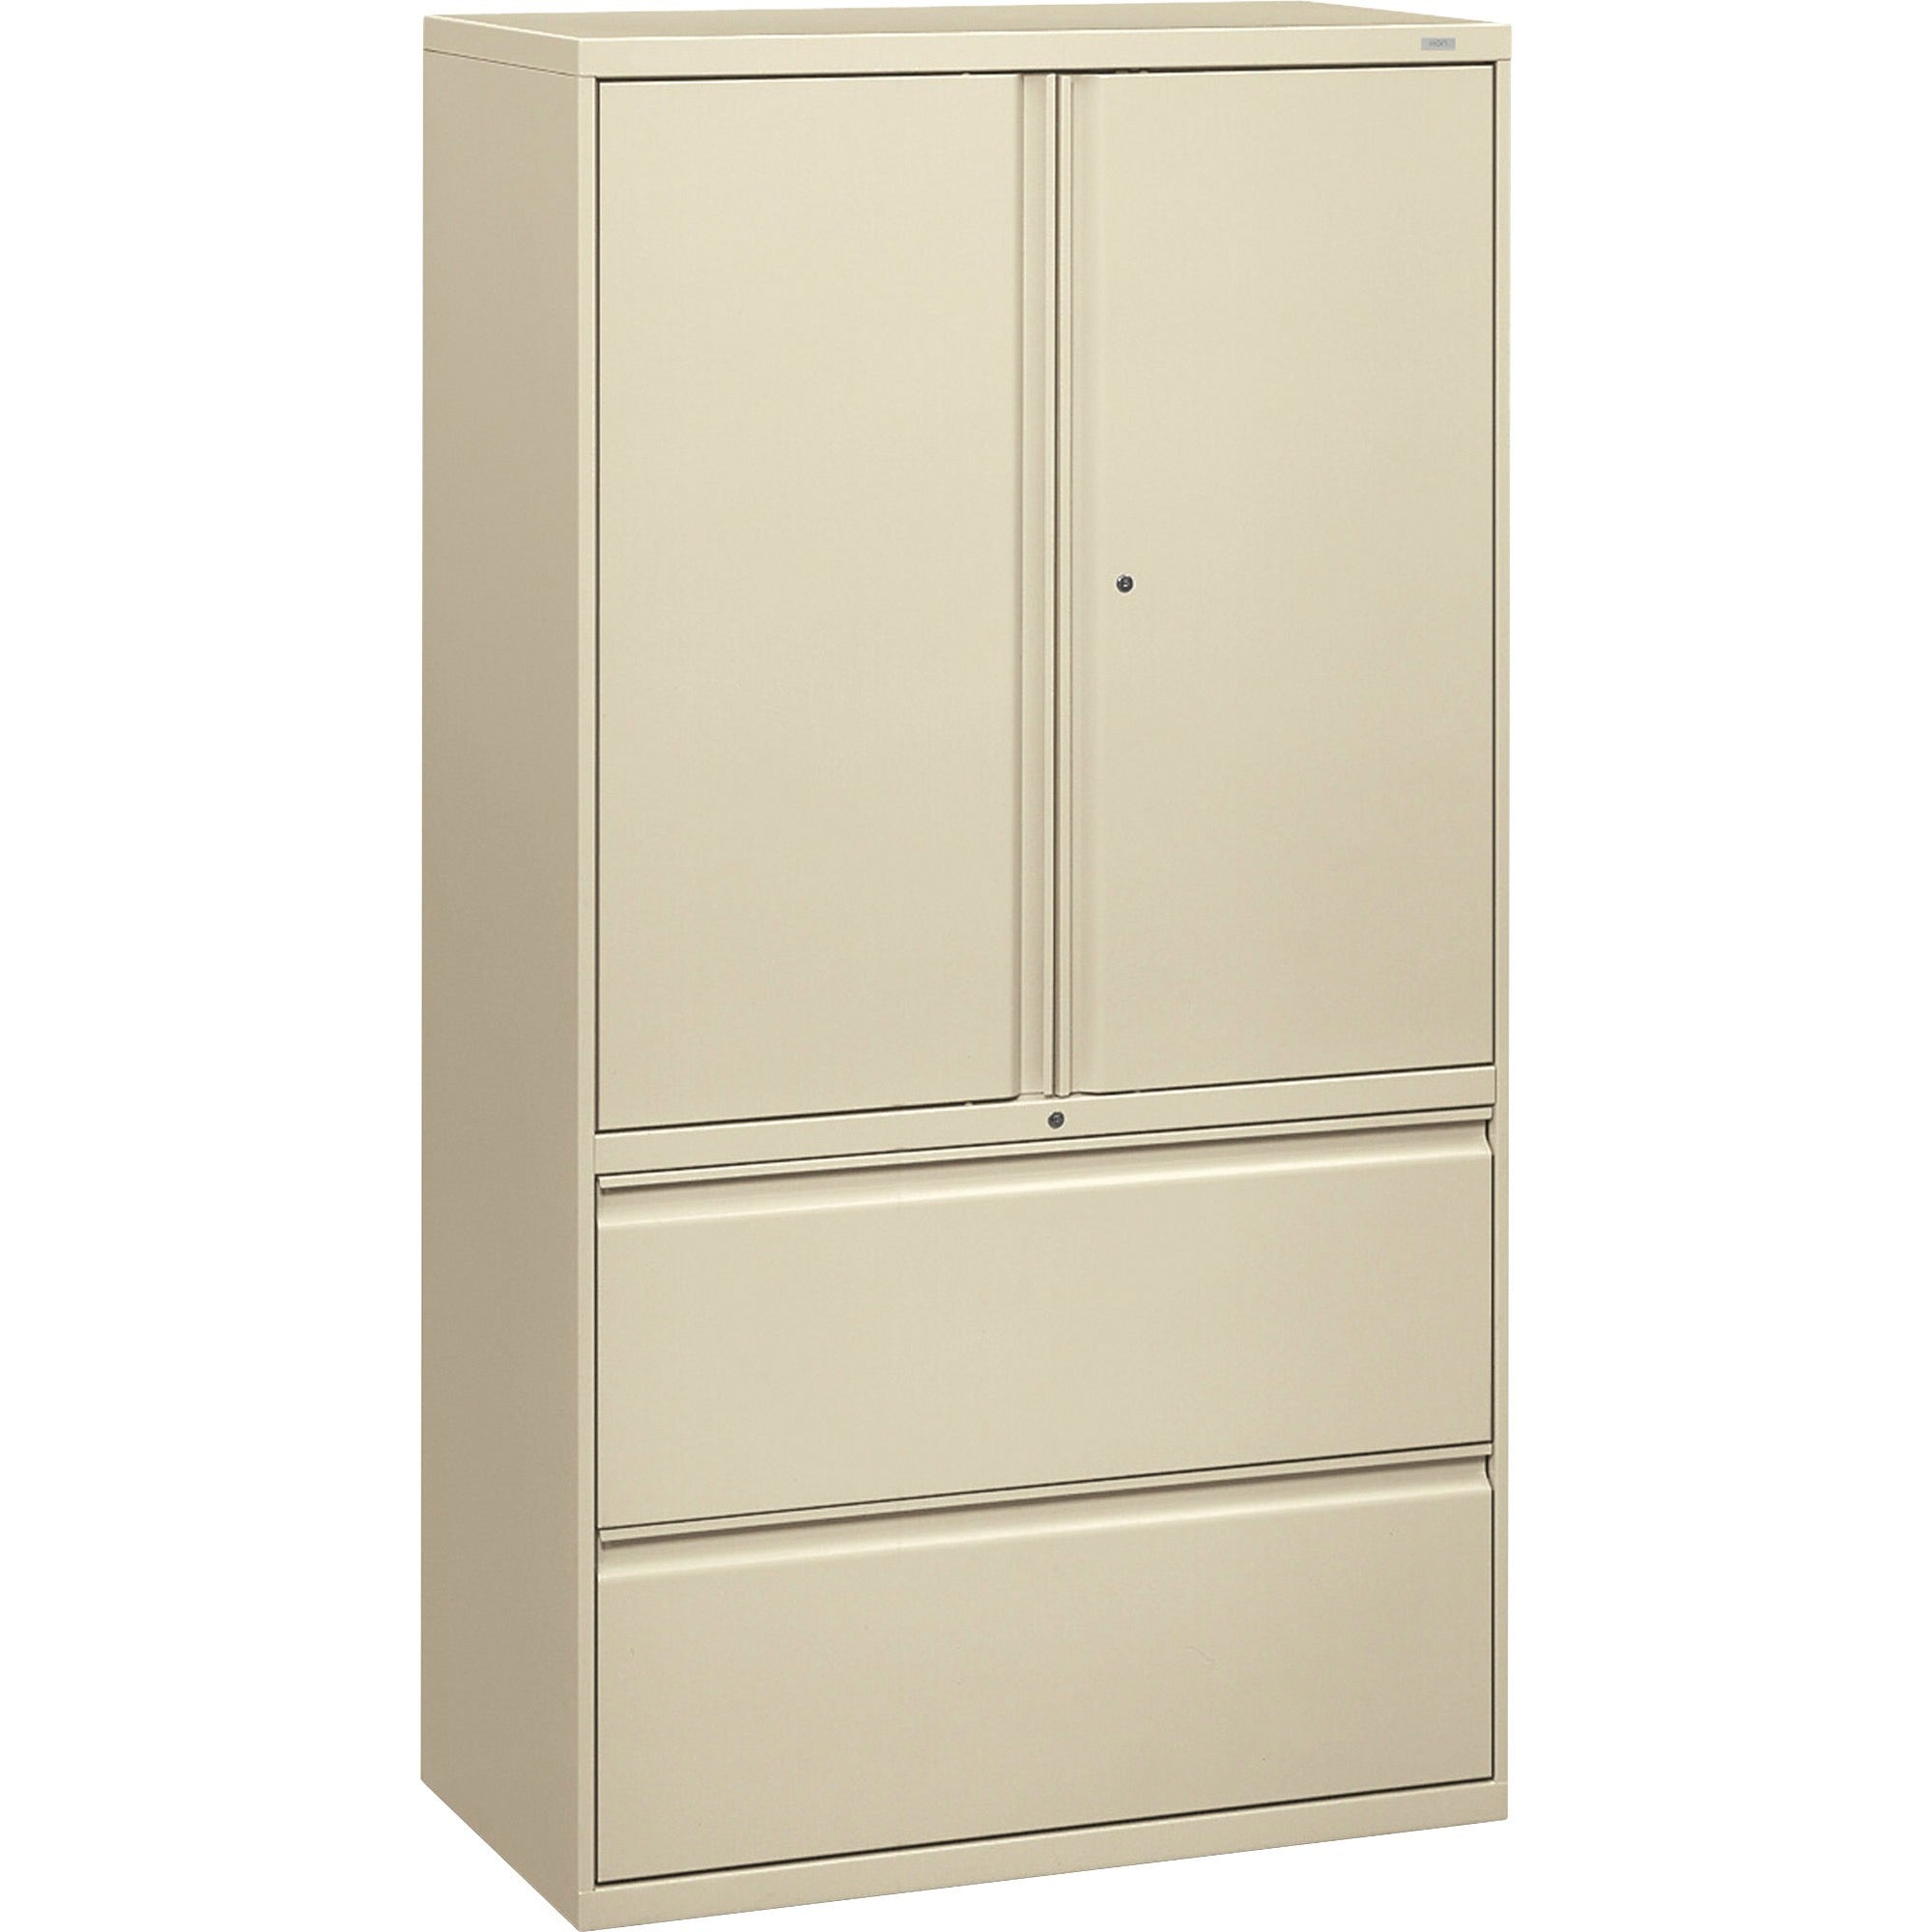 HON Brigade 800 H885LS Lateral File - 36" x 18"67" - 2 Drawer(s) - 3 Shelve(s) - Finish: Putty - 